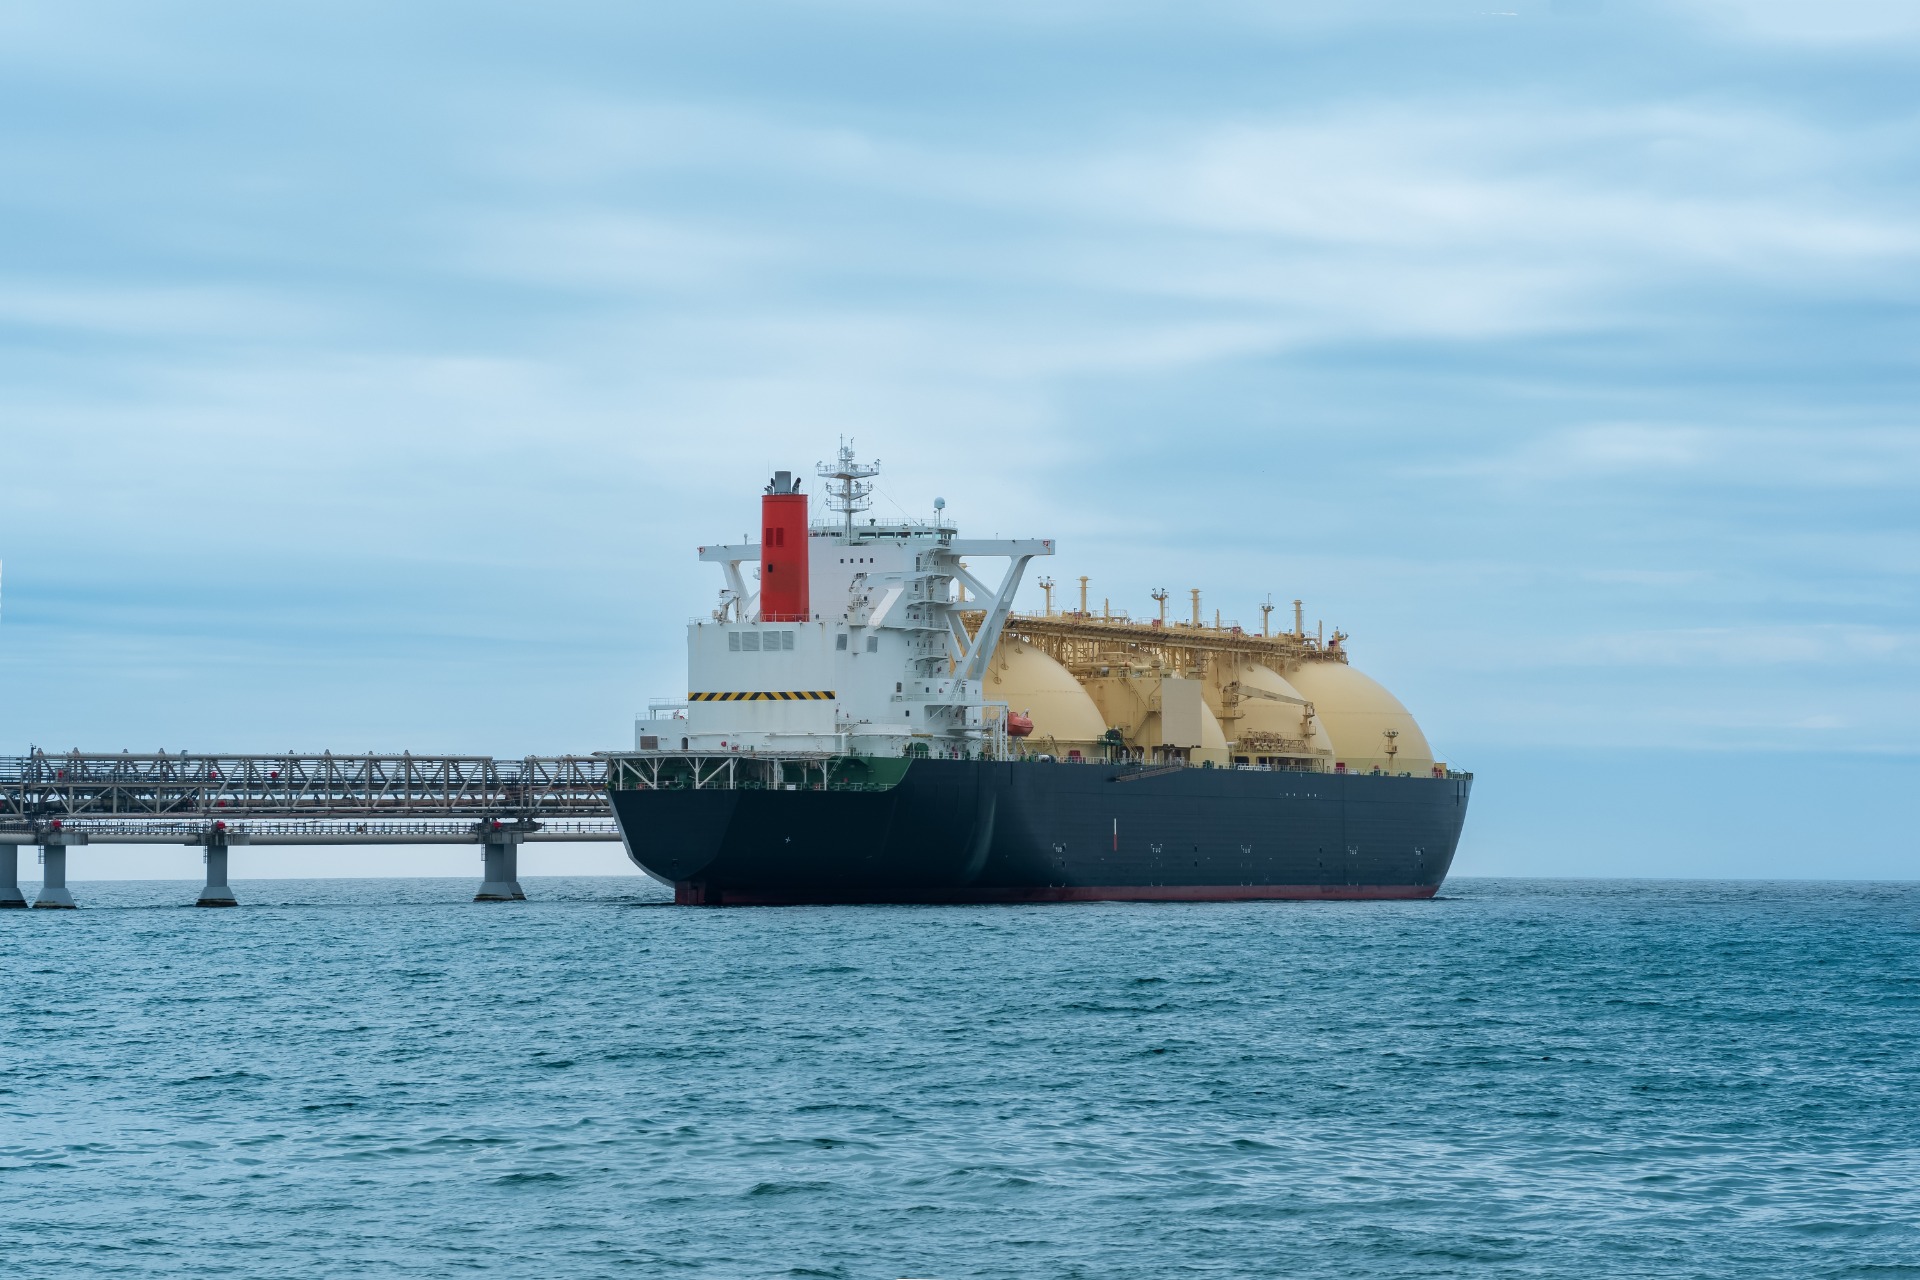 liquefied-natural-gas-tanker-vessel-during-loading-lng-offshore-terminal